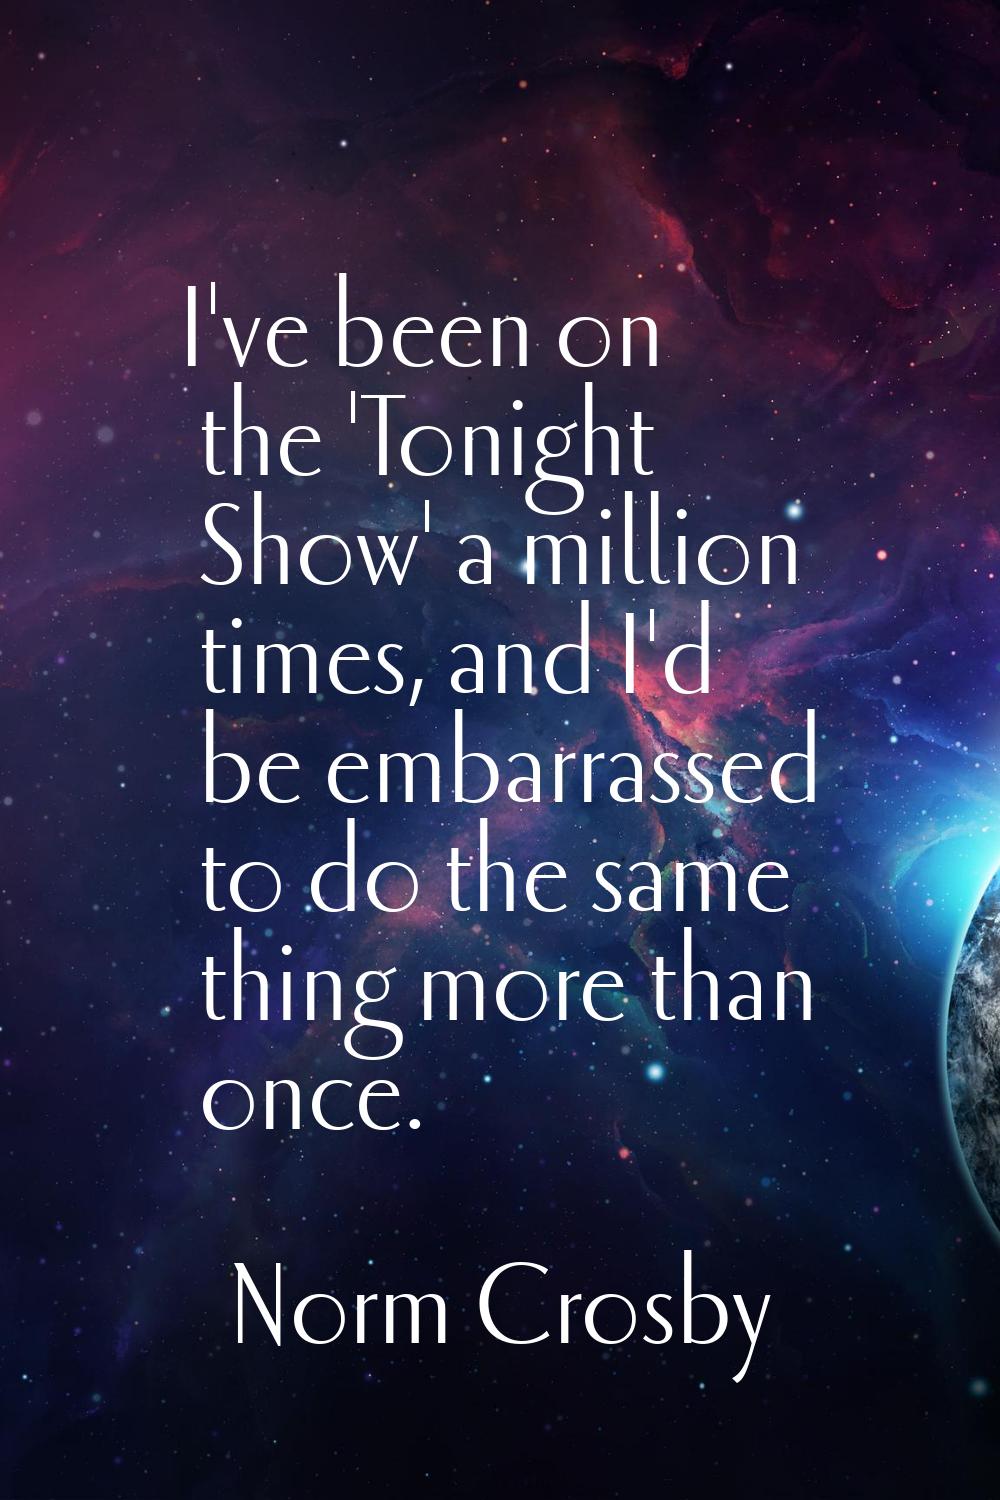 I've been on the 'Tonight Show' a million times, and I'd be embarrassed to do the same thing more t